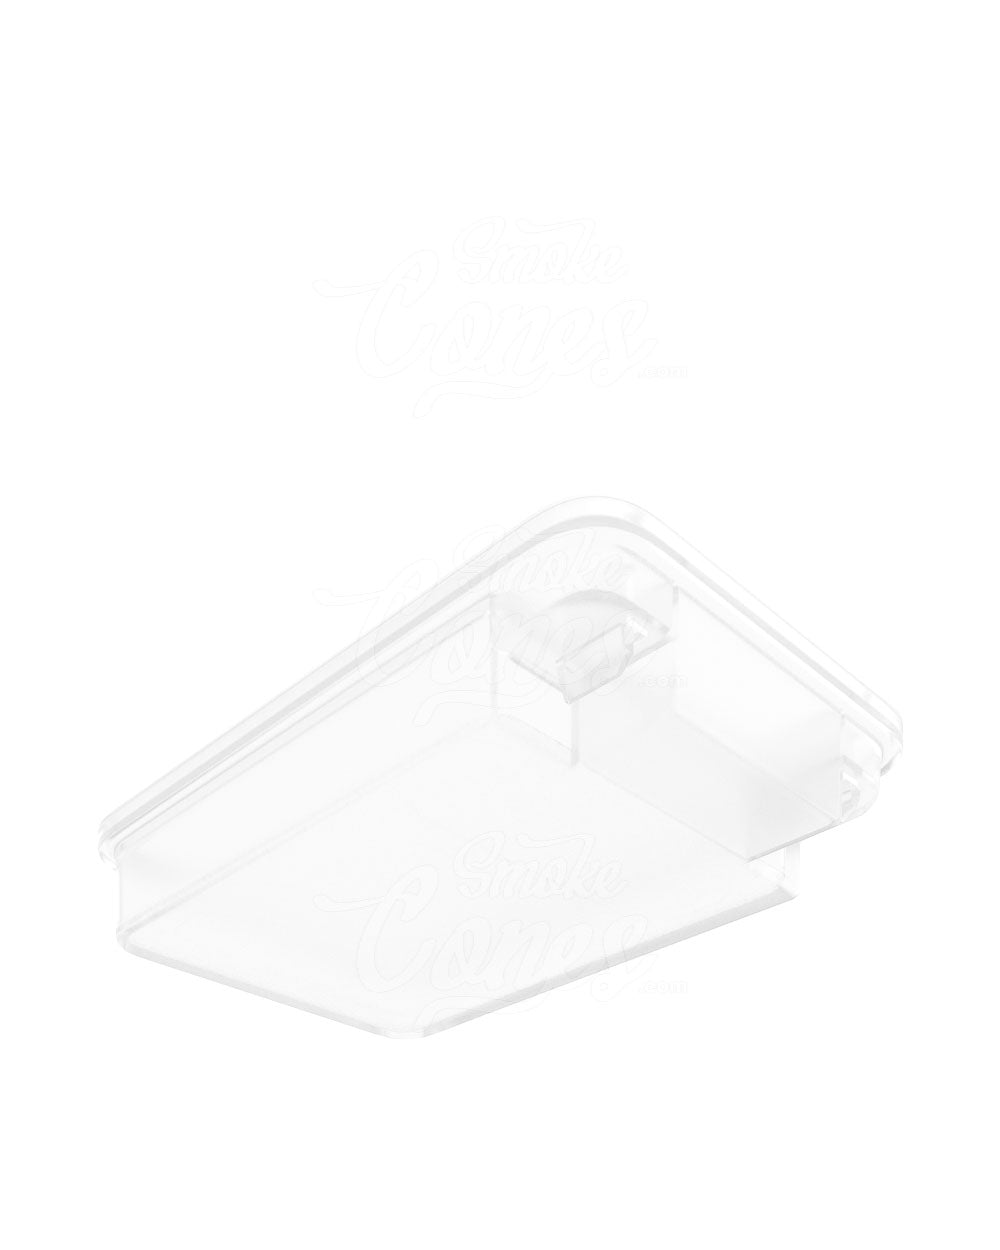 84mm Pollen Gear Clear SnapTech Child Resistant Edible & Pre-Roll Medium Joint Case 240/Box - 7